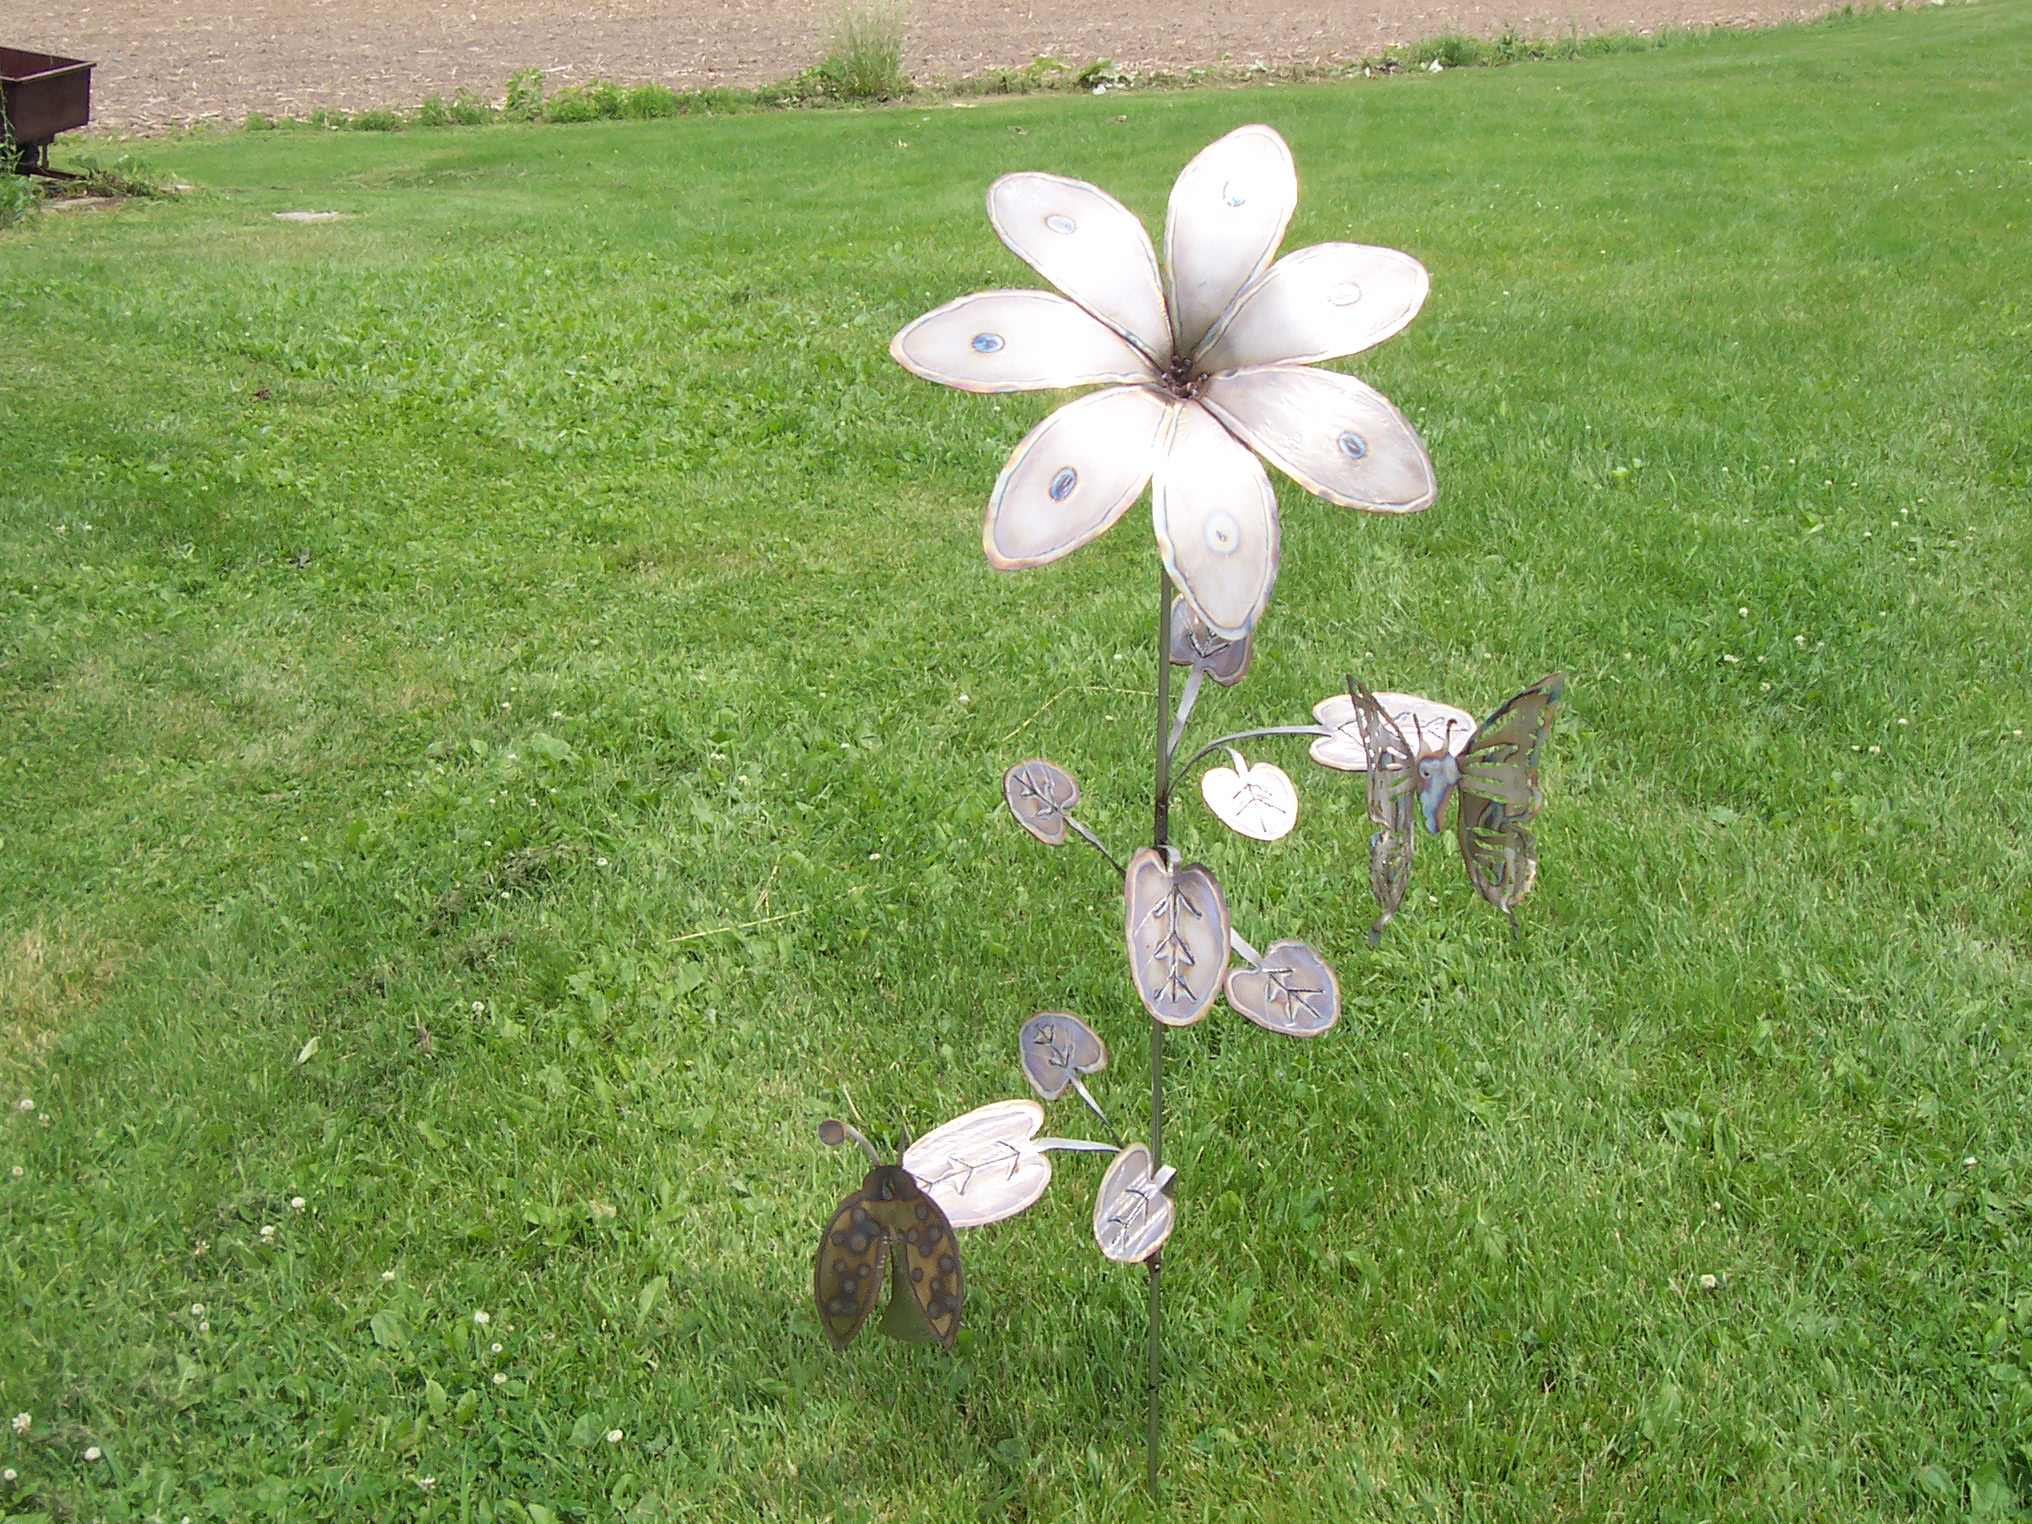 A bronze sculpture of a flower with two butterflys on the petals